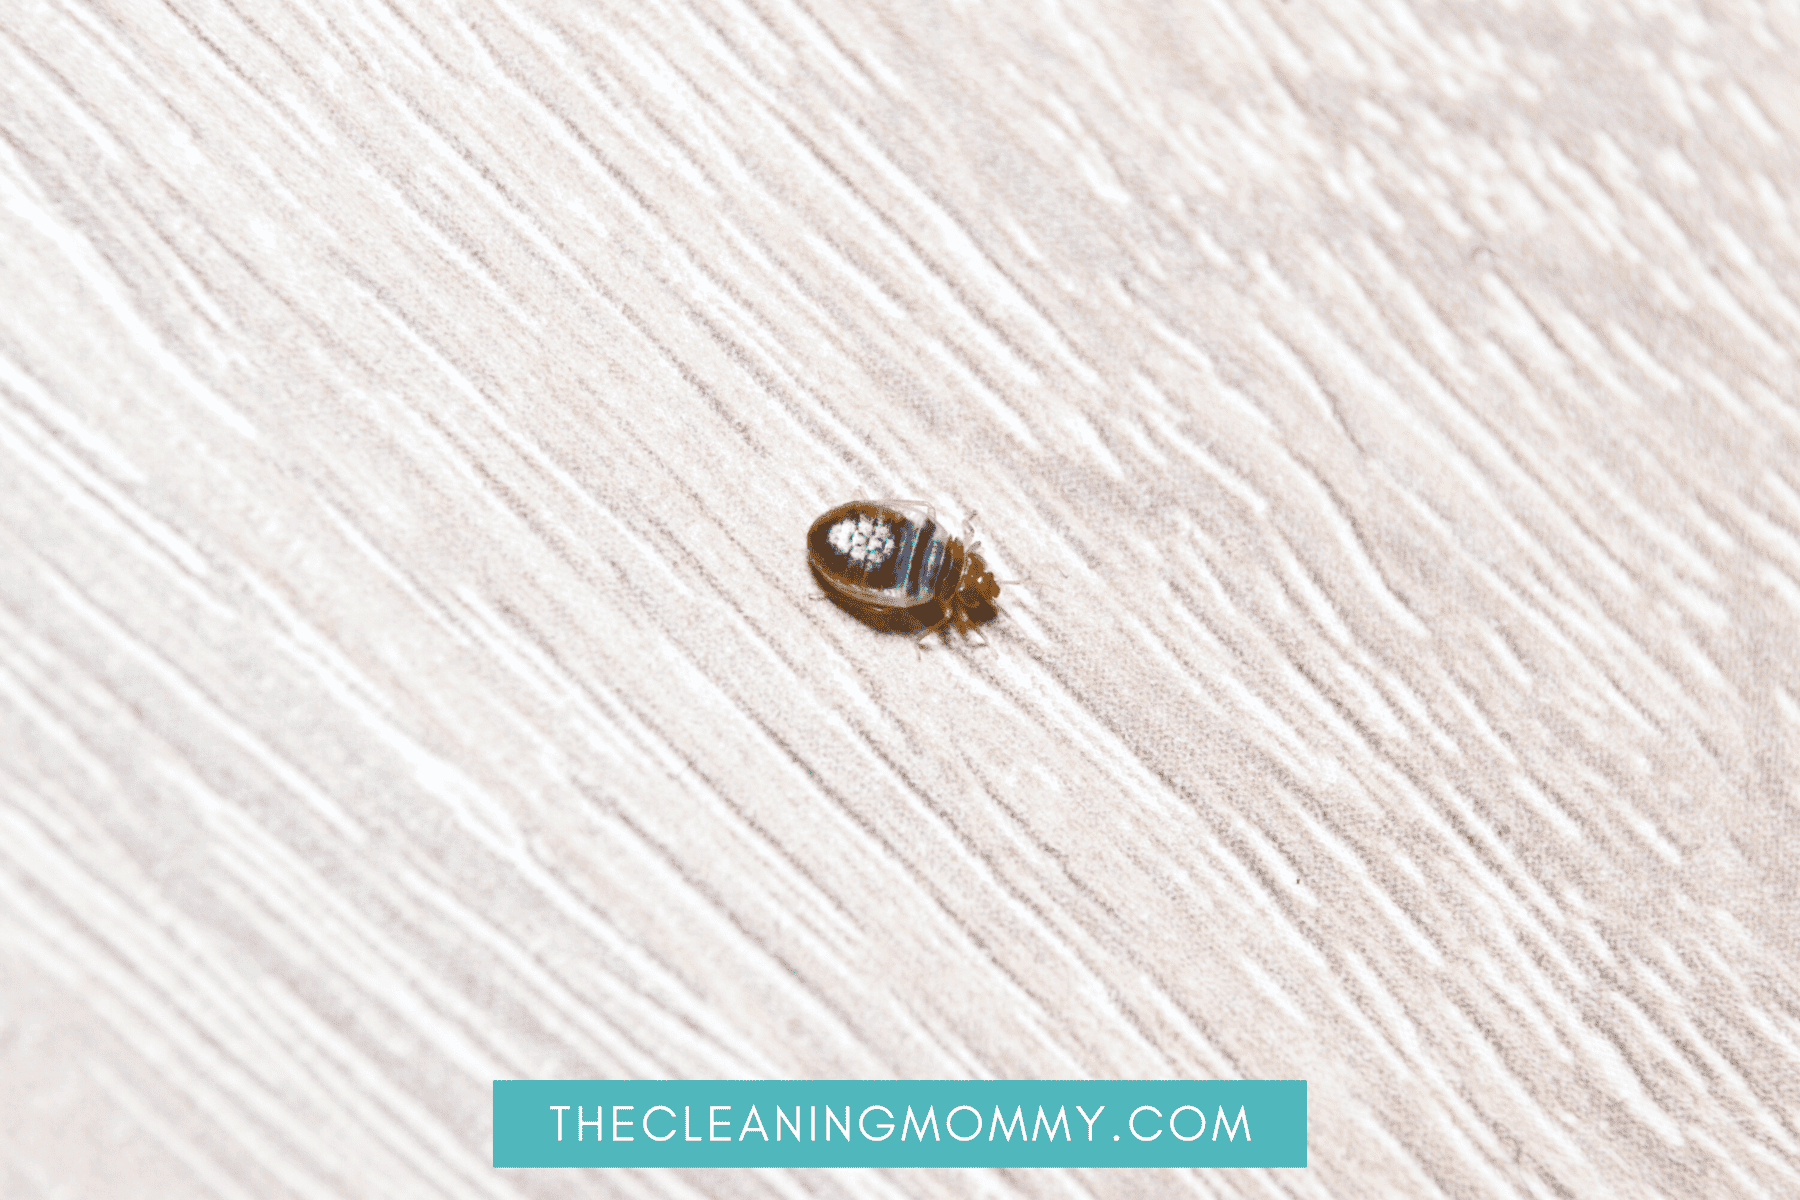 Disgusting bed bug on white carpet